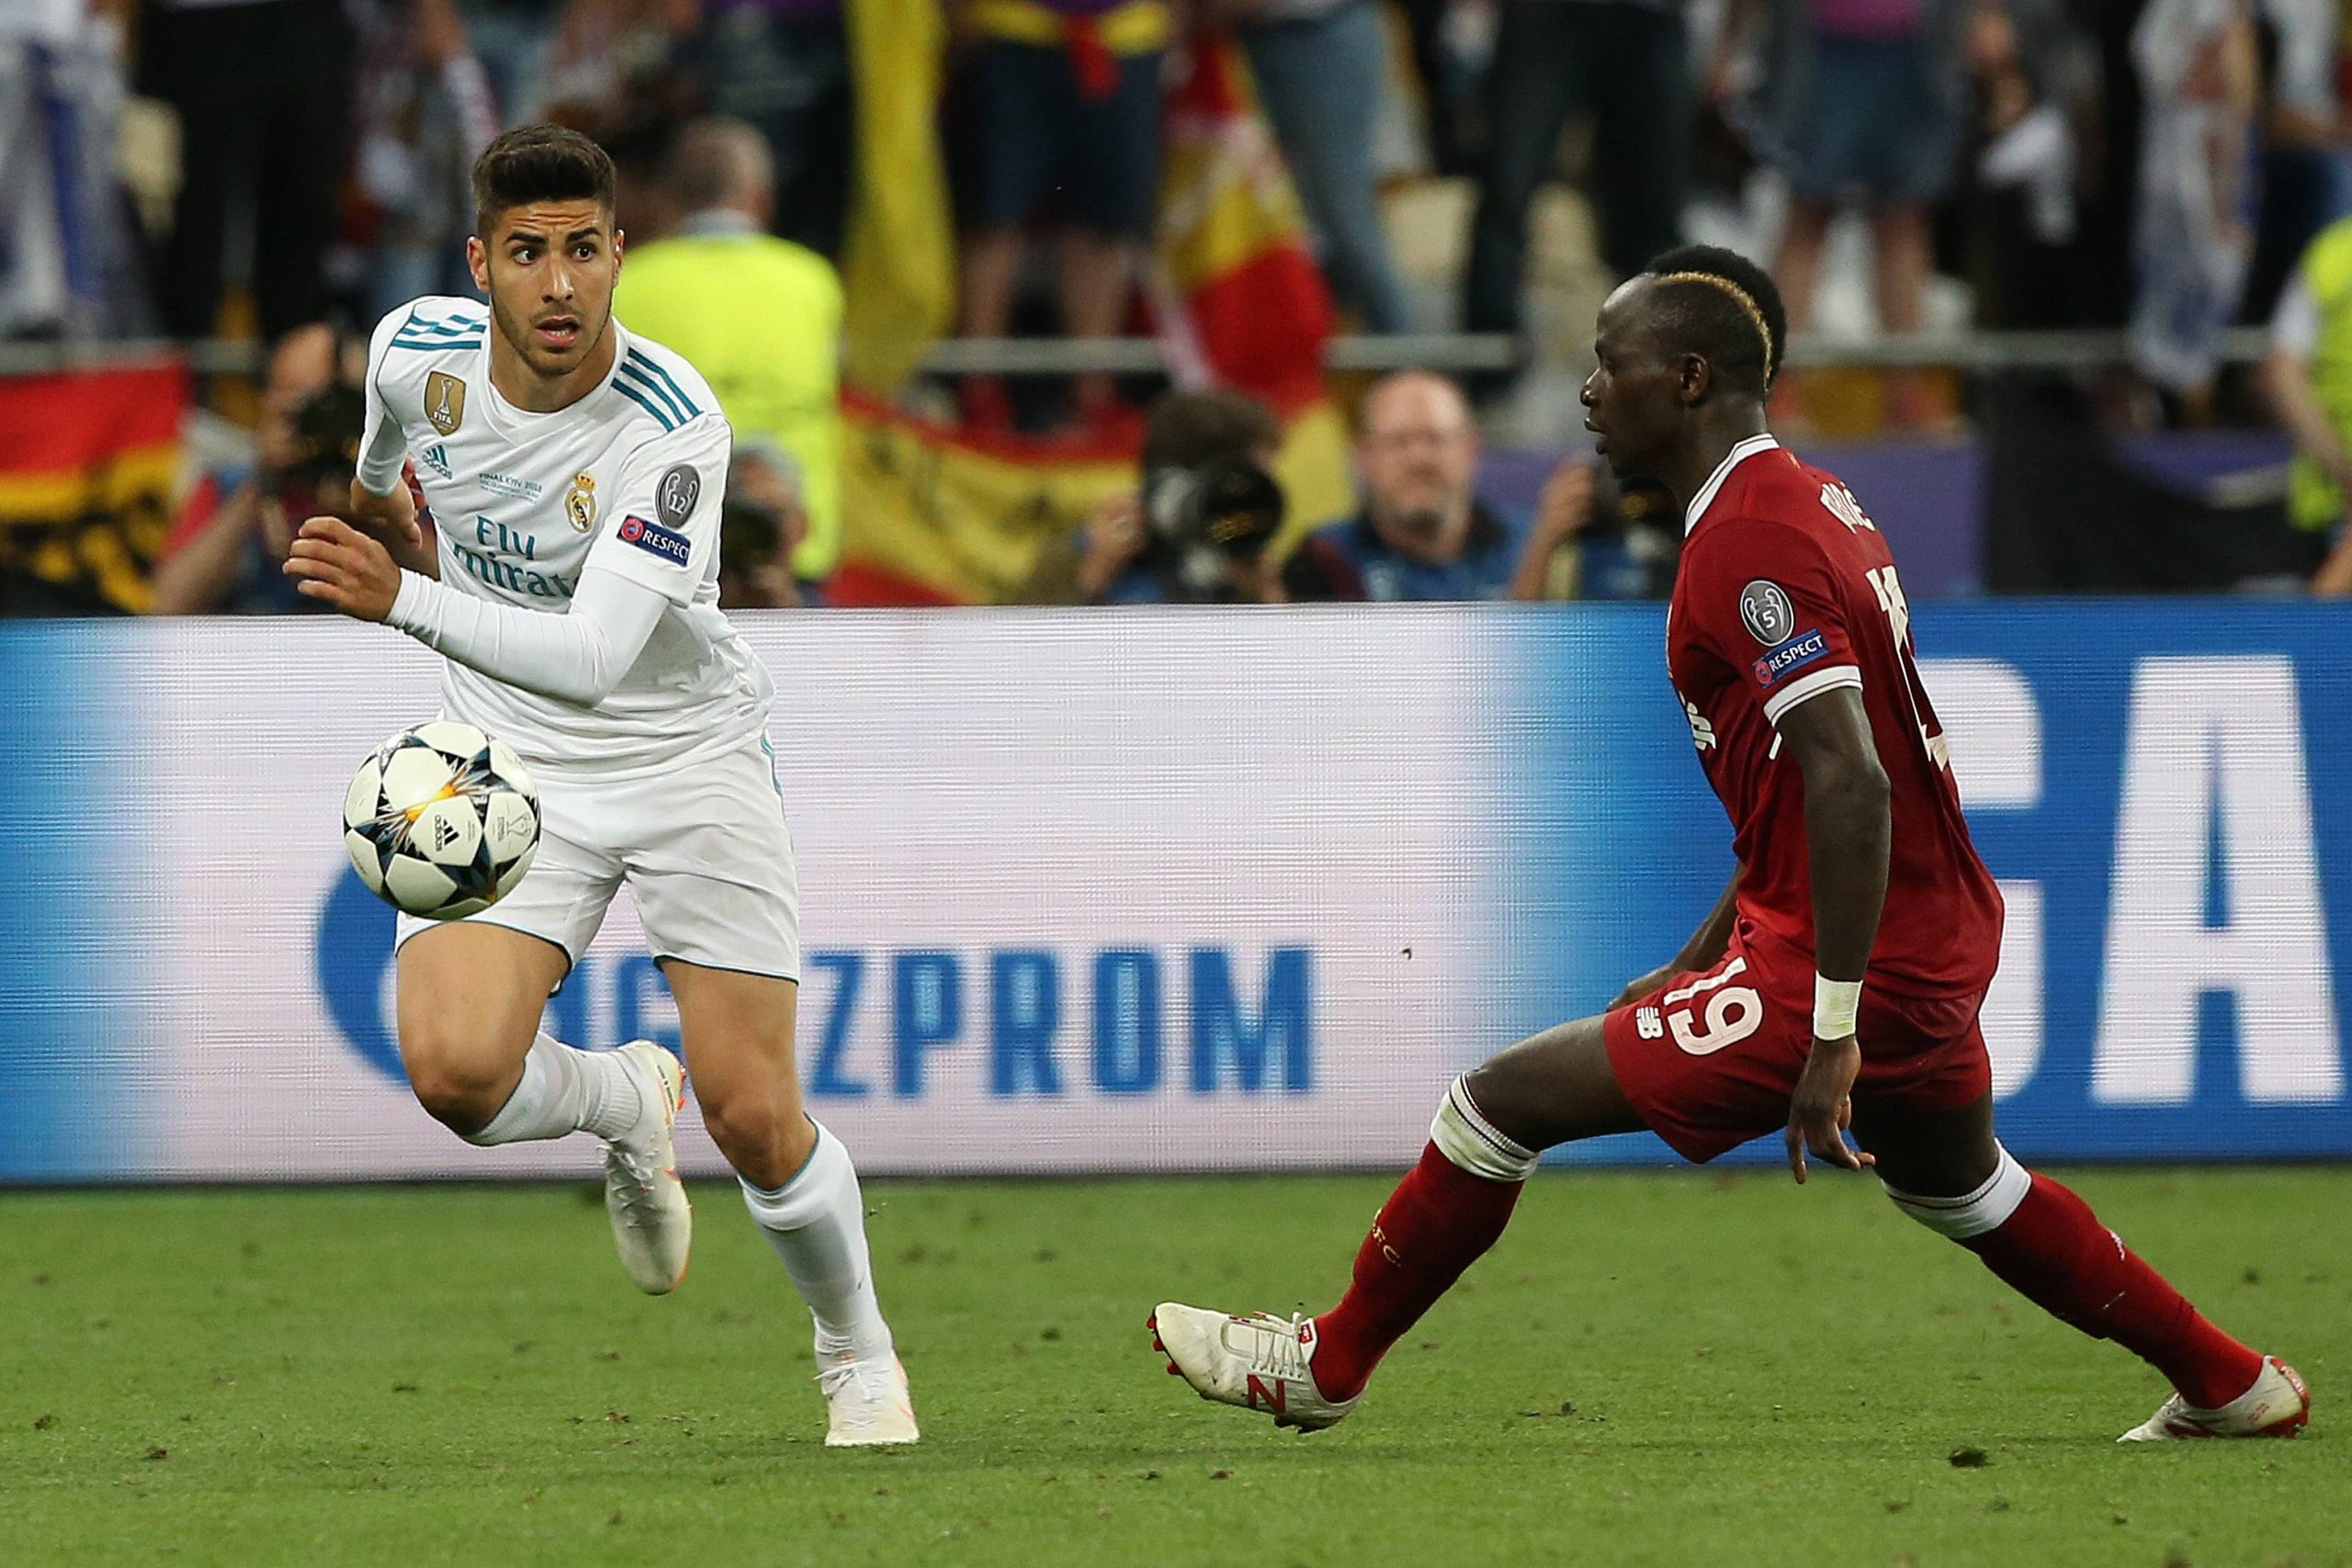 Liverpool pushing hard to seal Real Madrid attacker for a £21 million deal